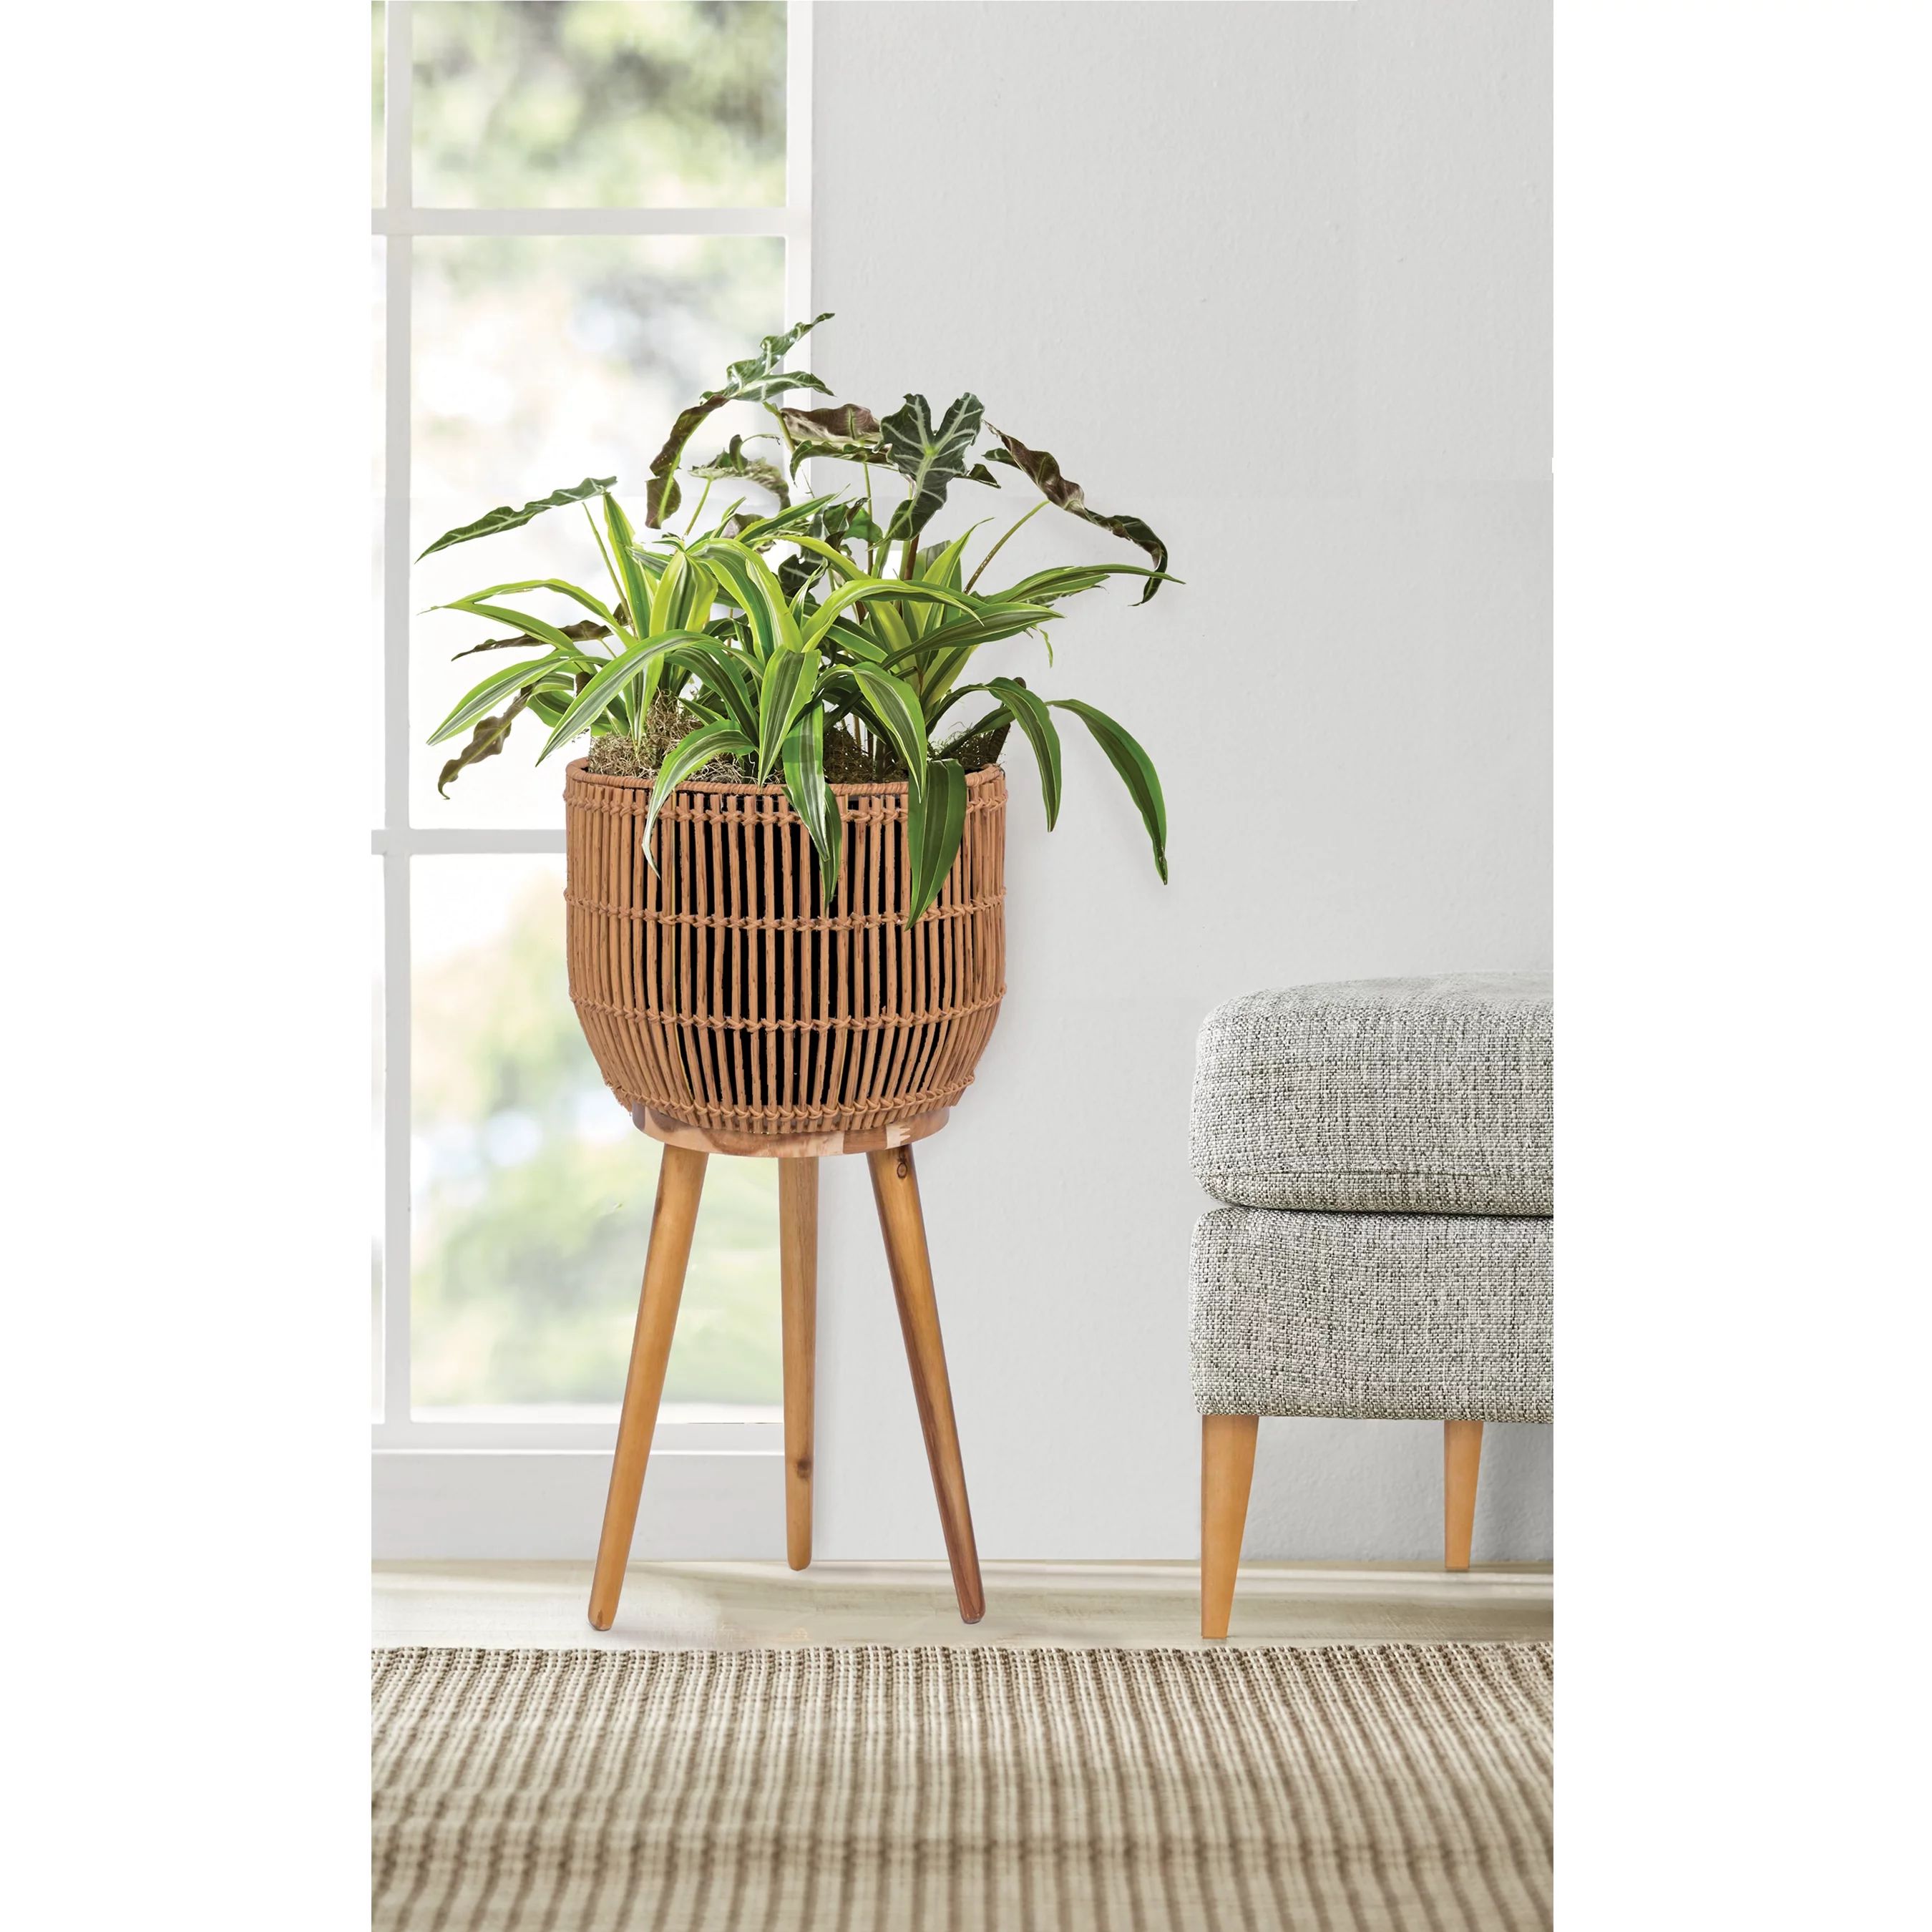 Better Homes & Gardens Brown Round Resin Planter & Stand Set with Wood Legs | Walmart (US)